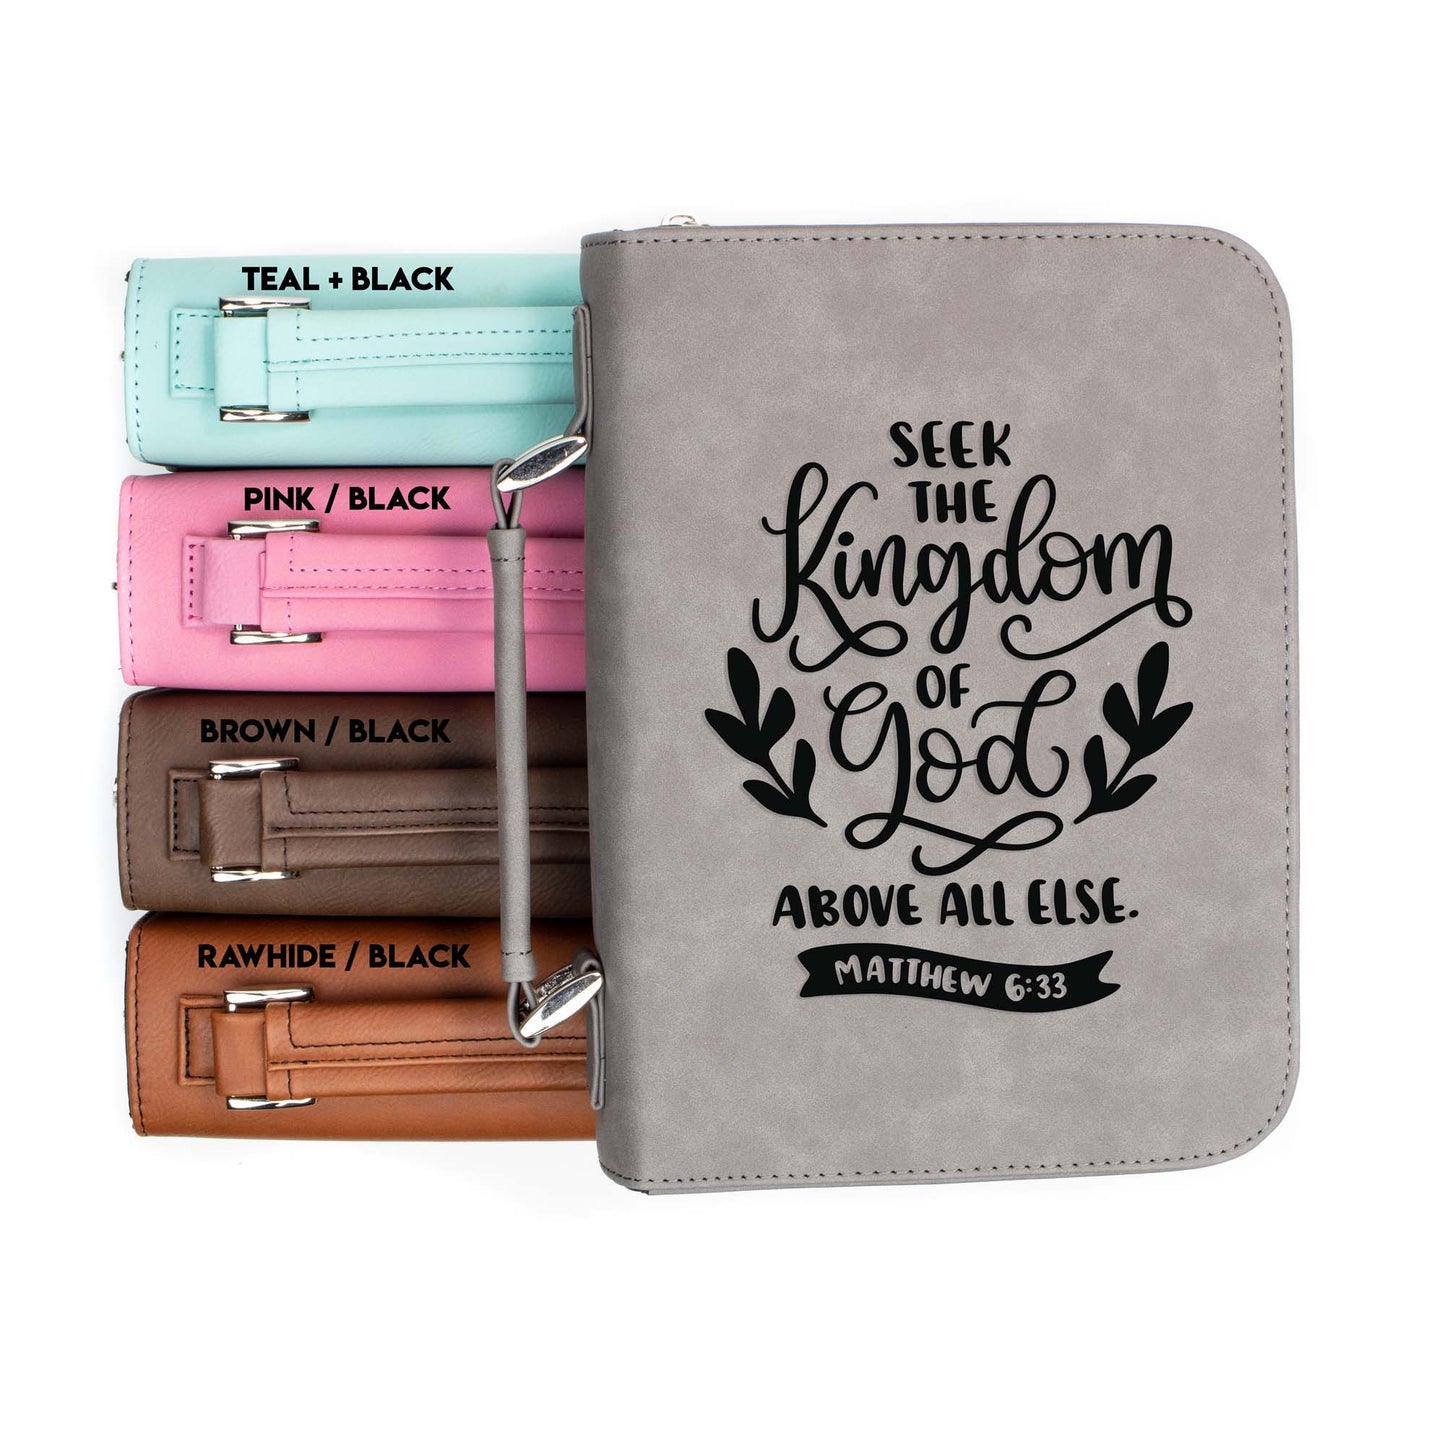 Seek the Kingdom of God Matthew 6-33 Bible Cover | Faux Leather With Handle + Pockets